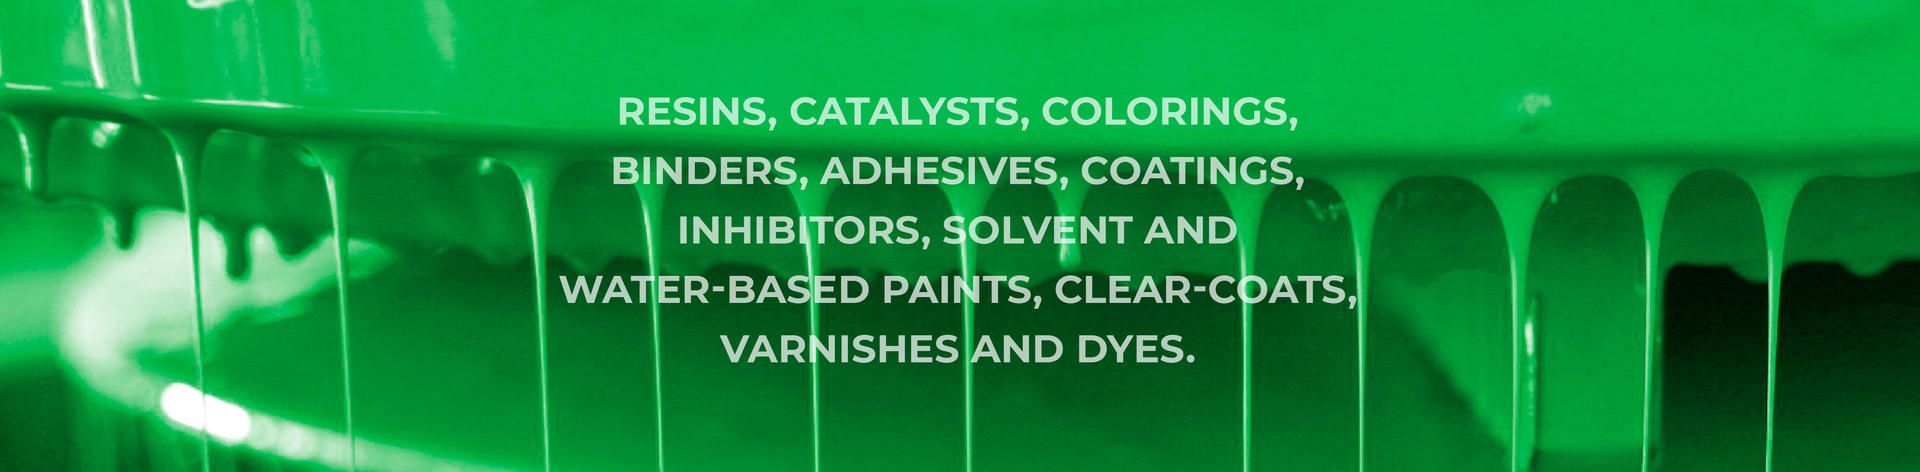 zenith_chameleon_elements_cz_1_dripping_green_paint_copy-new